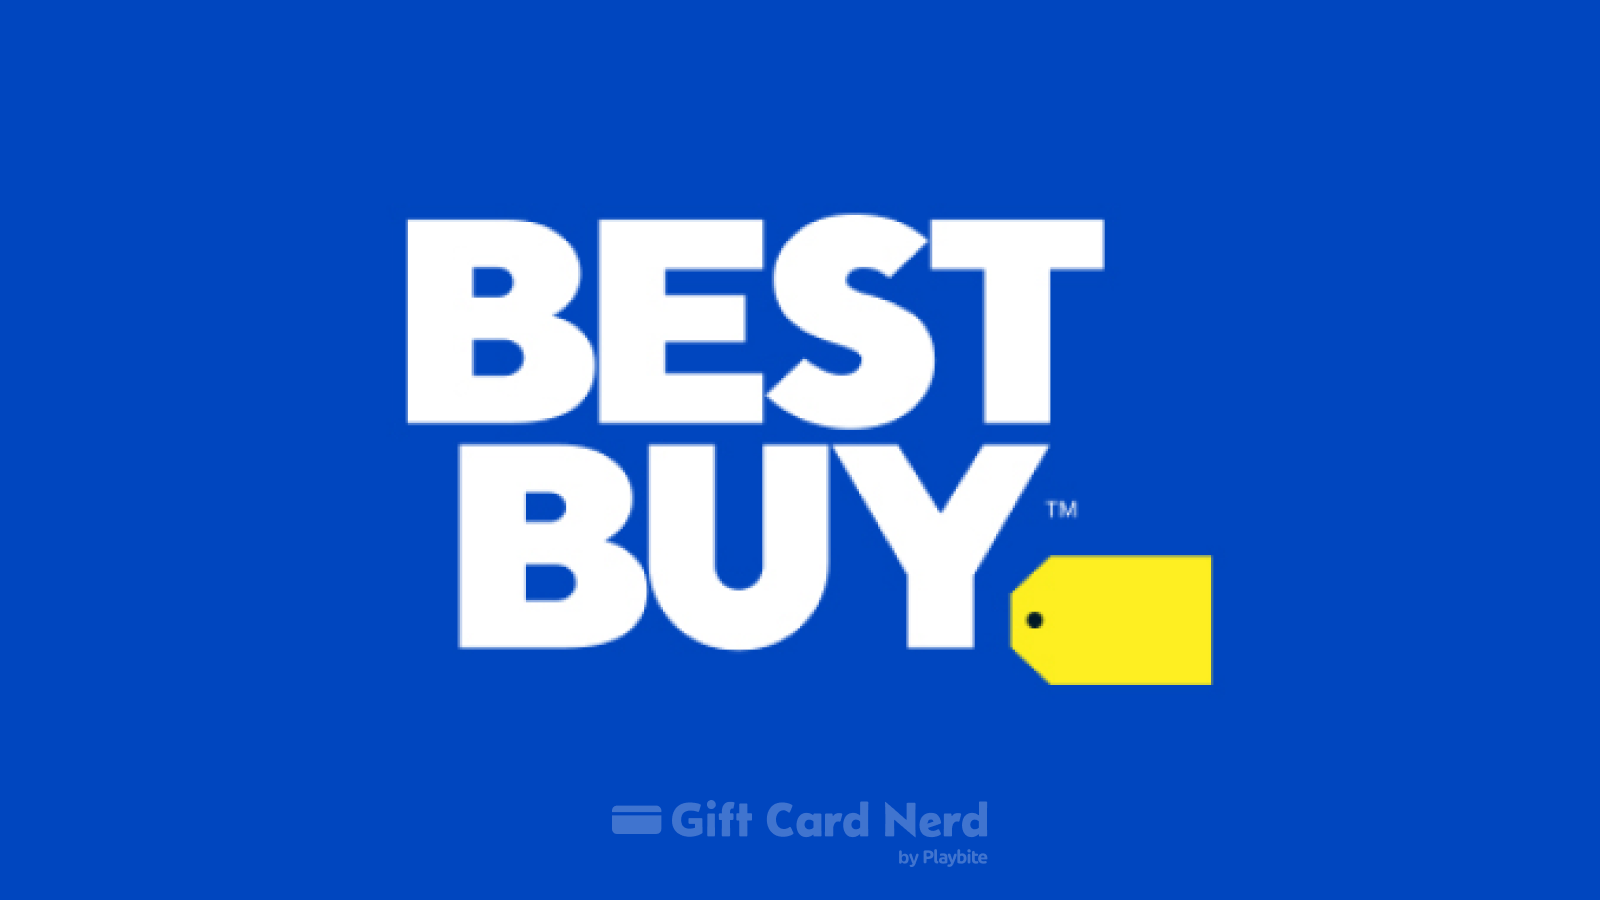 Can I Use a Best Buy Gift Card on Cash App?